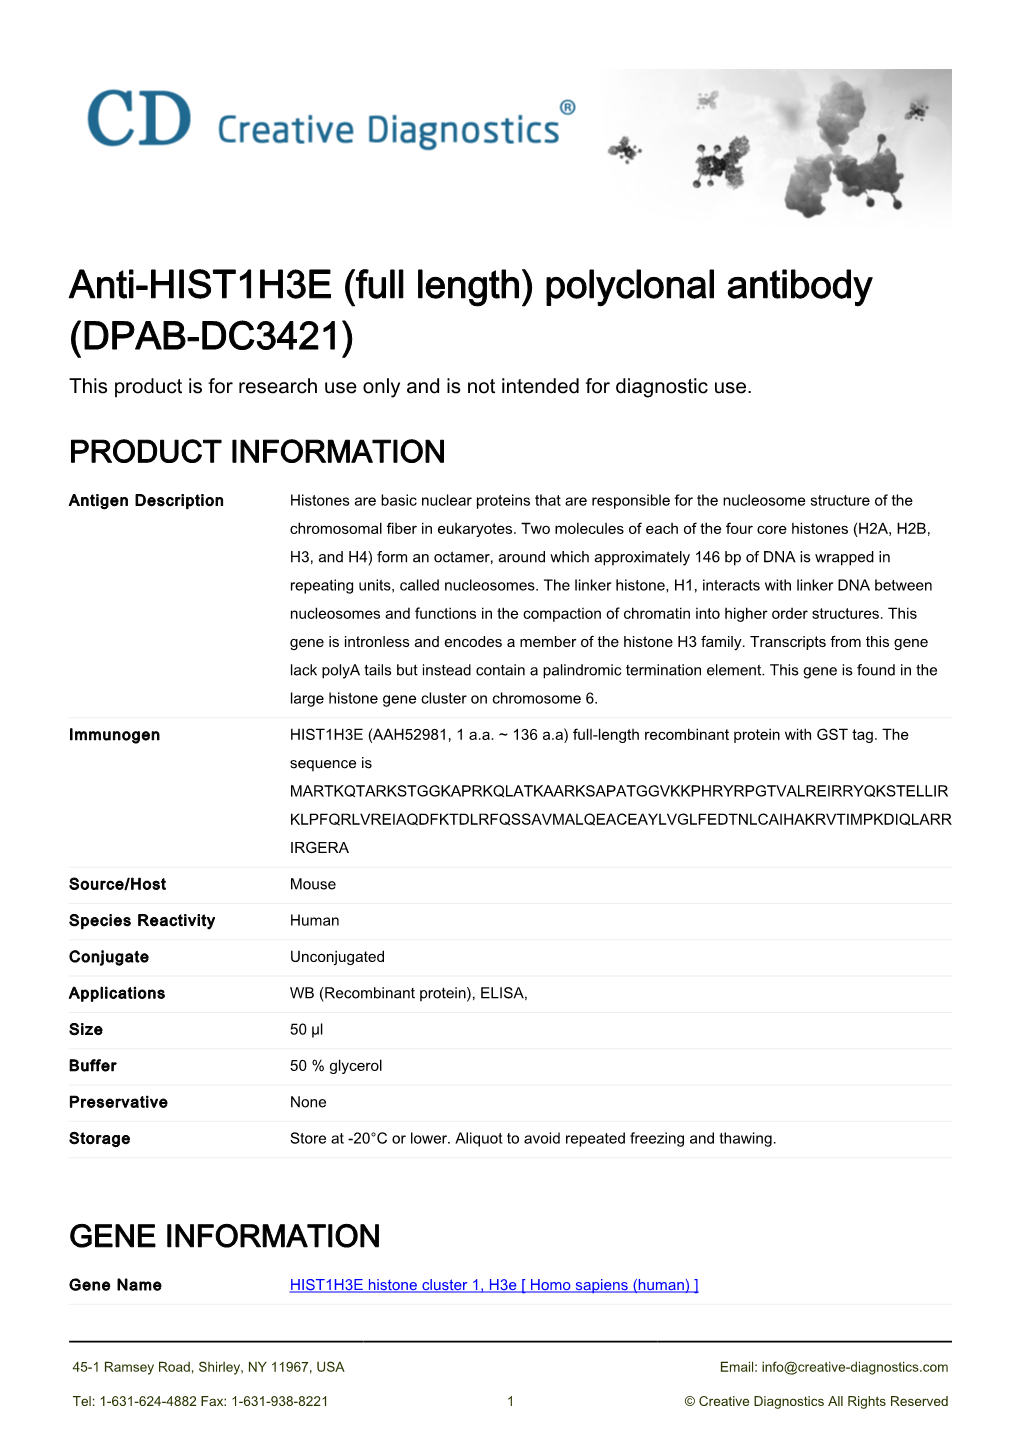 Anti-HIST1H3E (Full Length) Polyclonal Antibody (DPAB-DC3421) This Product Is for Research Use Only and Is Not Intended for Diagnostic Use